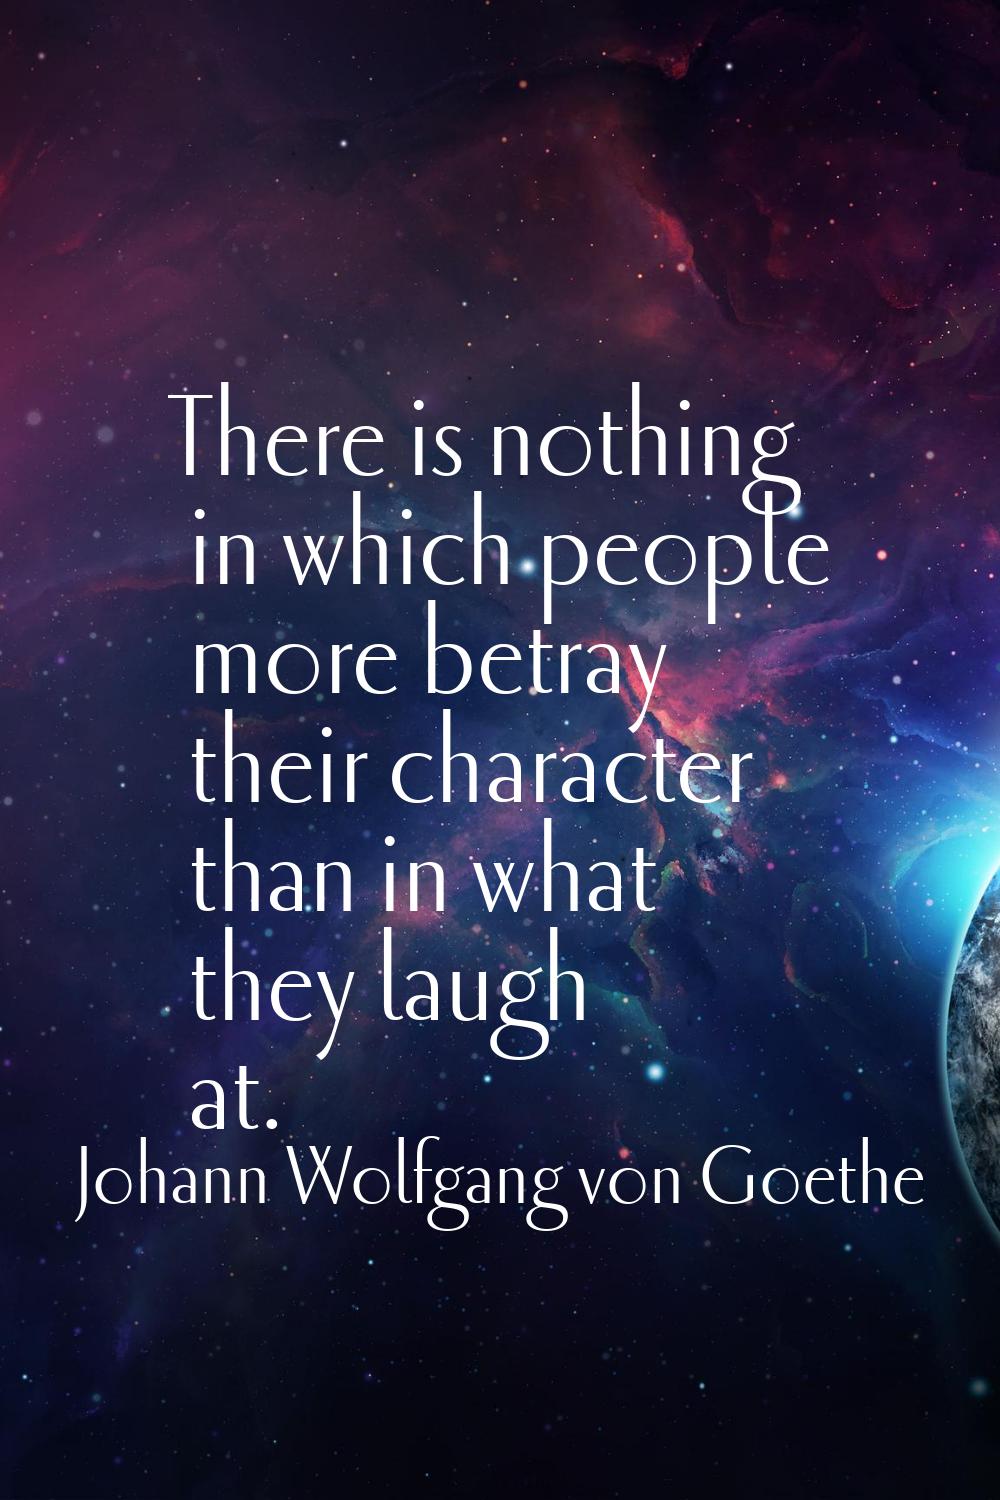 There is nothing in which people more betray their character than in what they laugh at.